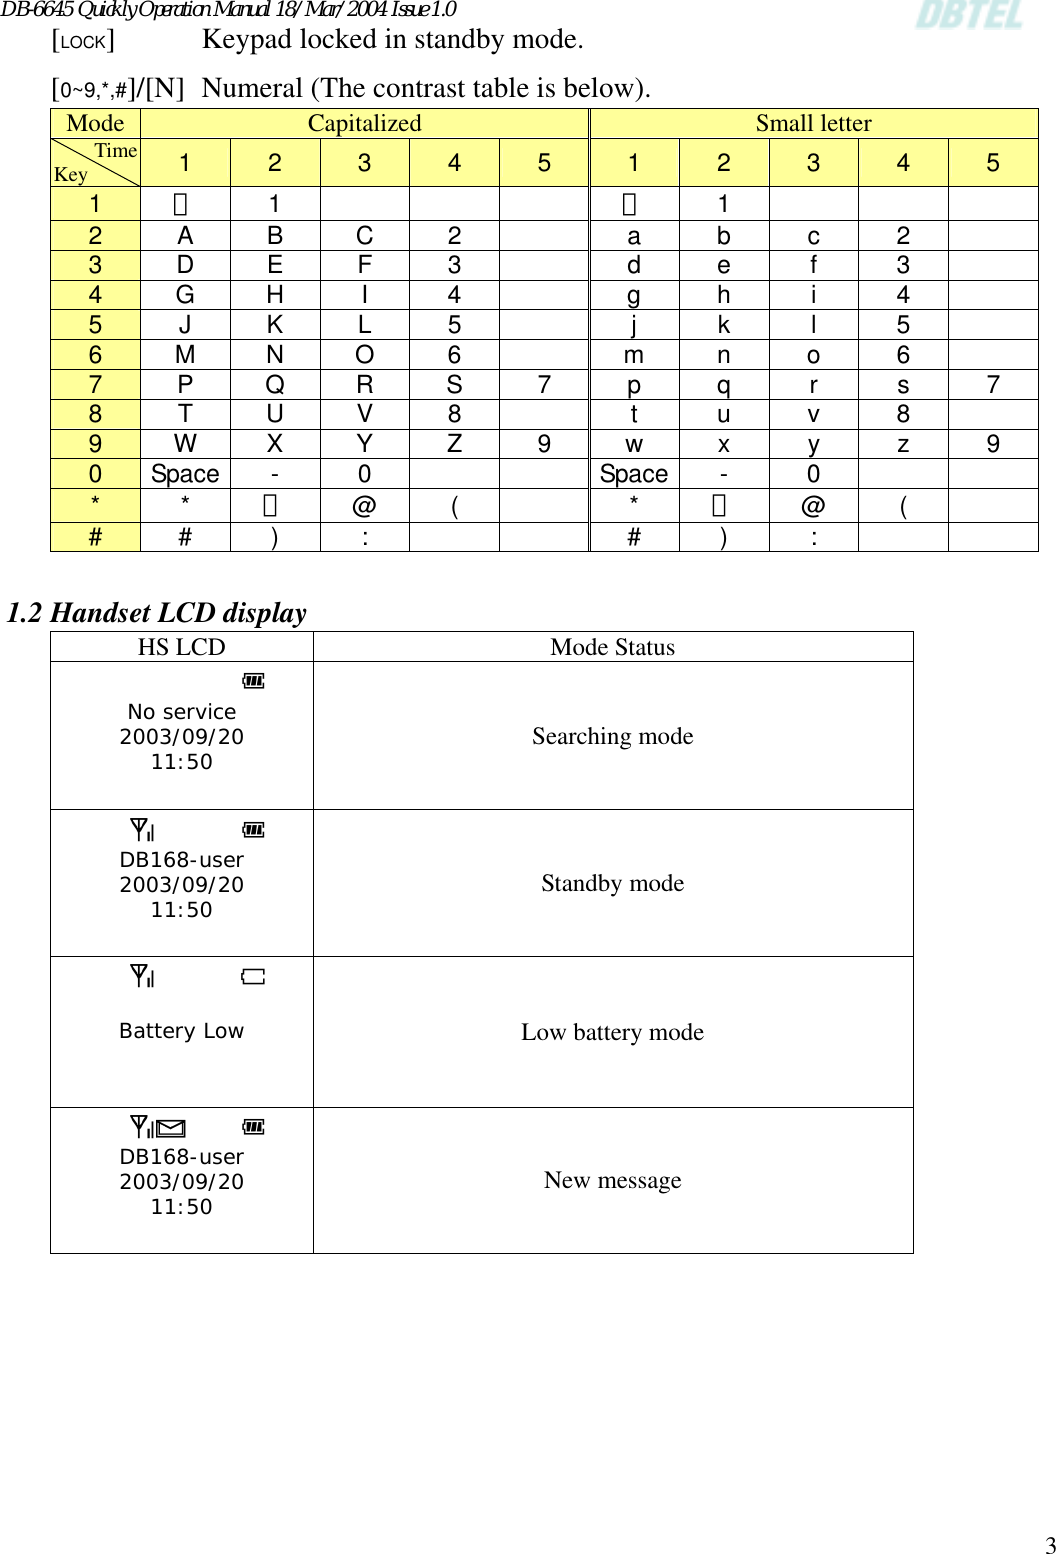 DB-6645 Quickly Operation Manual 18/Mar/2004 Issue 1.0  3[LOCK]      Keypad locked in standby mode. [0~9,*,#]/[N] Numeral (The contrast table is below). Mode  Capitalized  Small letter Time Key 1  2  3  4  5  1  2  3  4  5 1  ，  1      ，  1      2  A B C 2    a b c 2   3  D E F 3    d e  f  3   4  G H  I  4    g  h  i  4   5  J K L 5    j  k  l  5   6  M N O 6   m n o 6   7  P Q R S 7  p  q  r  s  7 8  T U V 8    t  u v 8   9  W X Y  Z  9  w  x  y  z  9 0  Space - 0     Space - 0     *  *  ．  @ (    * ．  @ (   #  # ) :     # ) :     1.2 Handset LCD display HS LCD  Mode Status A No service 2003/09/20 11:50   Searching mode A DB168-user 2003/09/20 11:50  Standby mode A  Battery Low   Low battery mode A DB168-user 2003/09/20 11:50  New message  